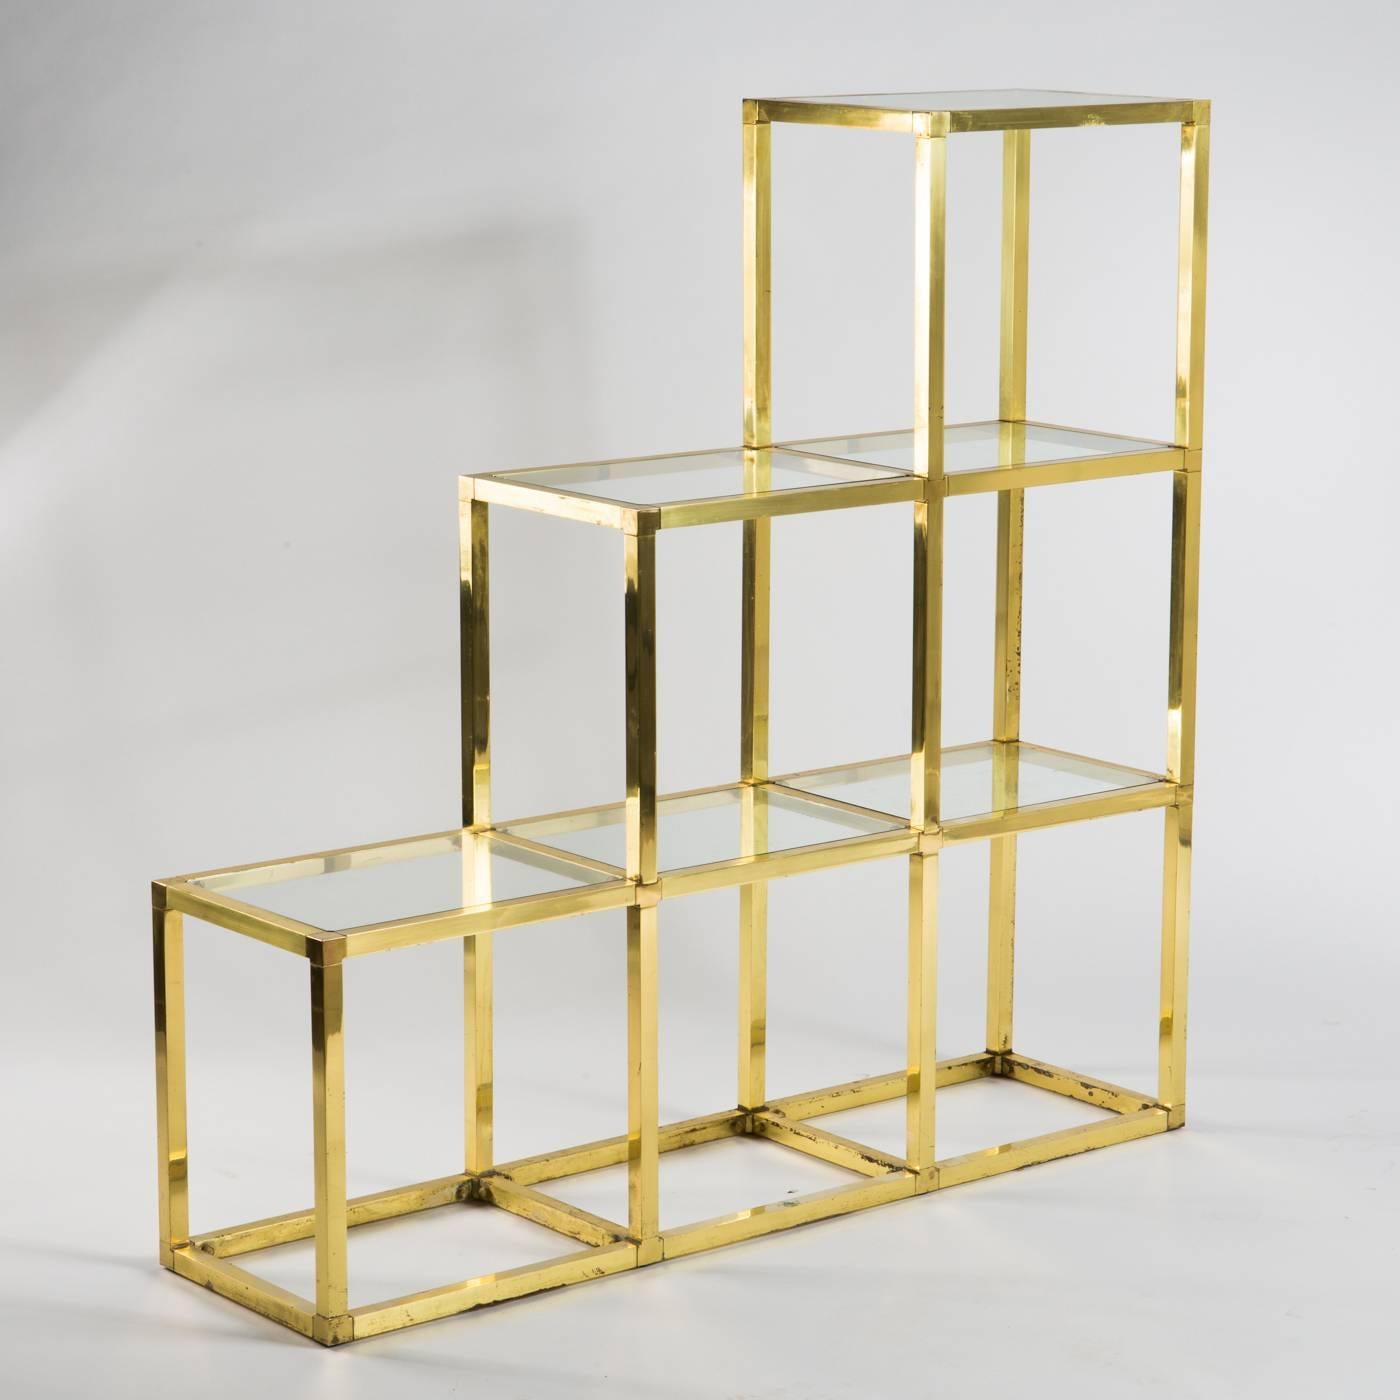 Vintage brass and glass shelving system in Art Deco style designed by Italian Romeo Rega in 1970s.